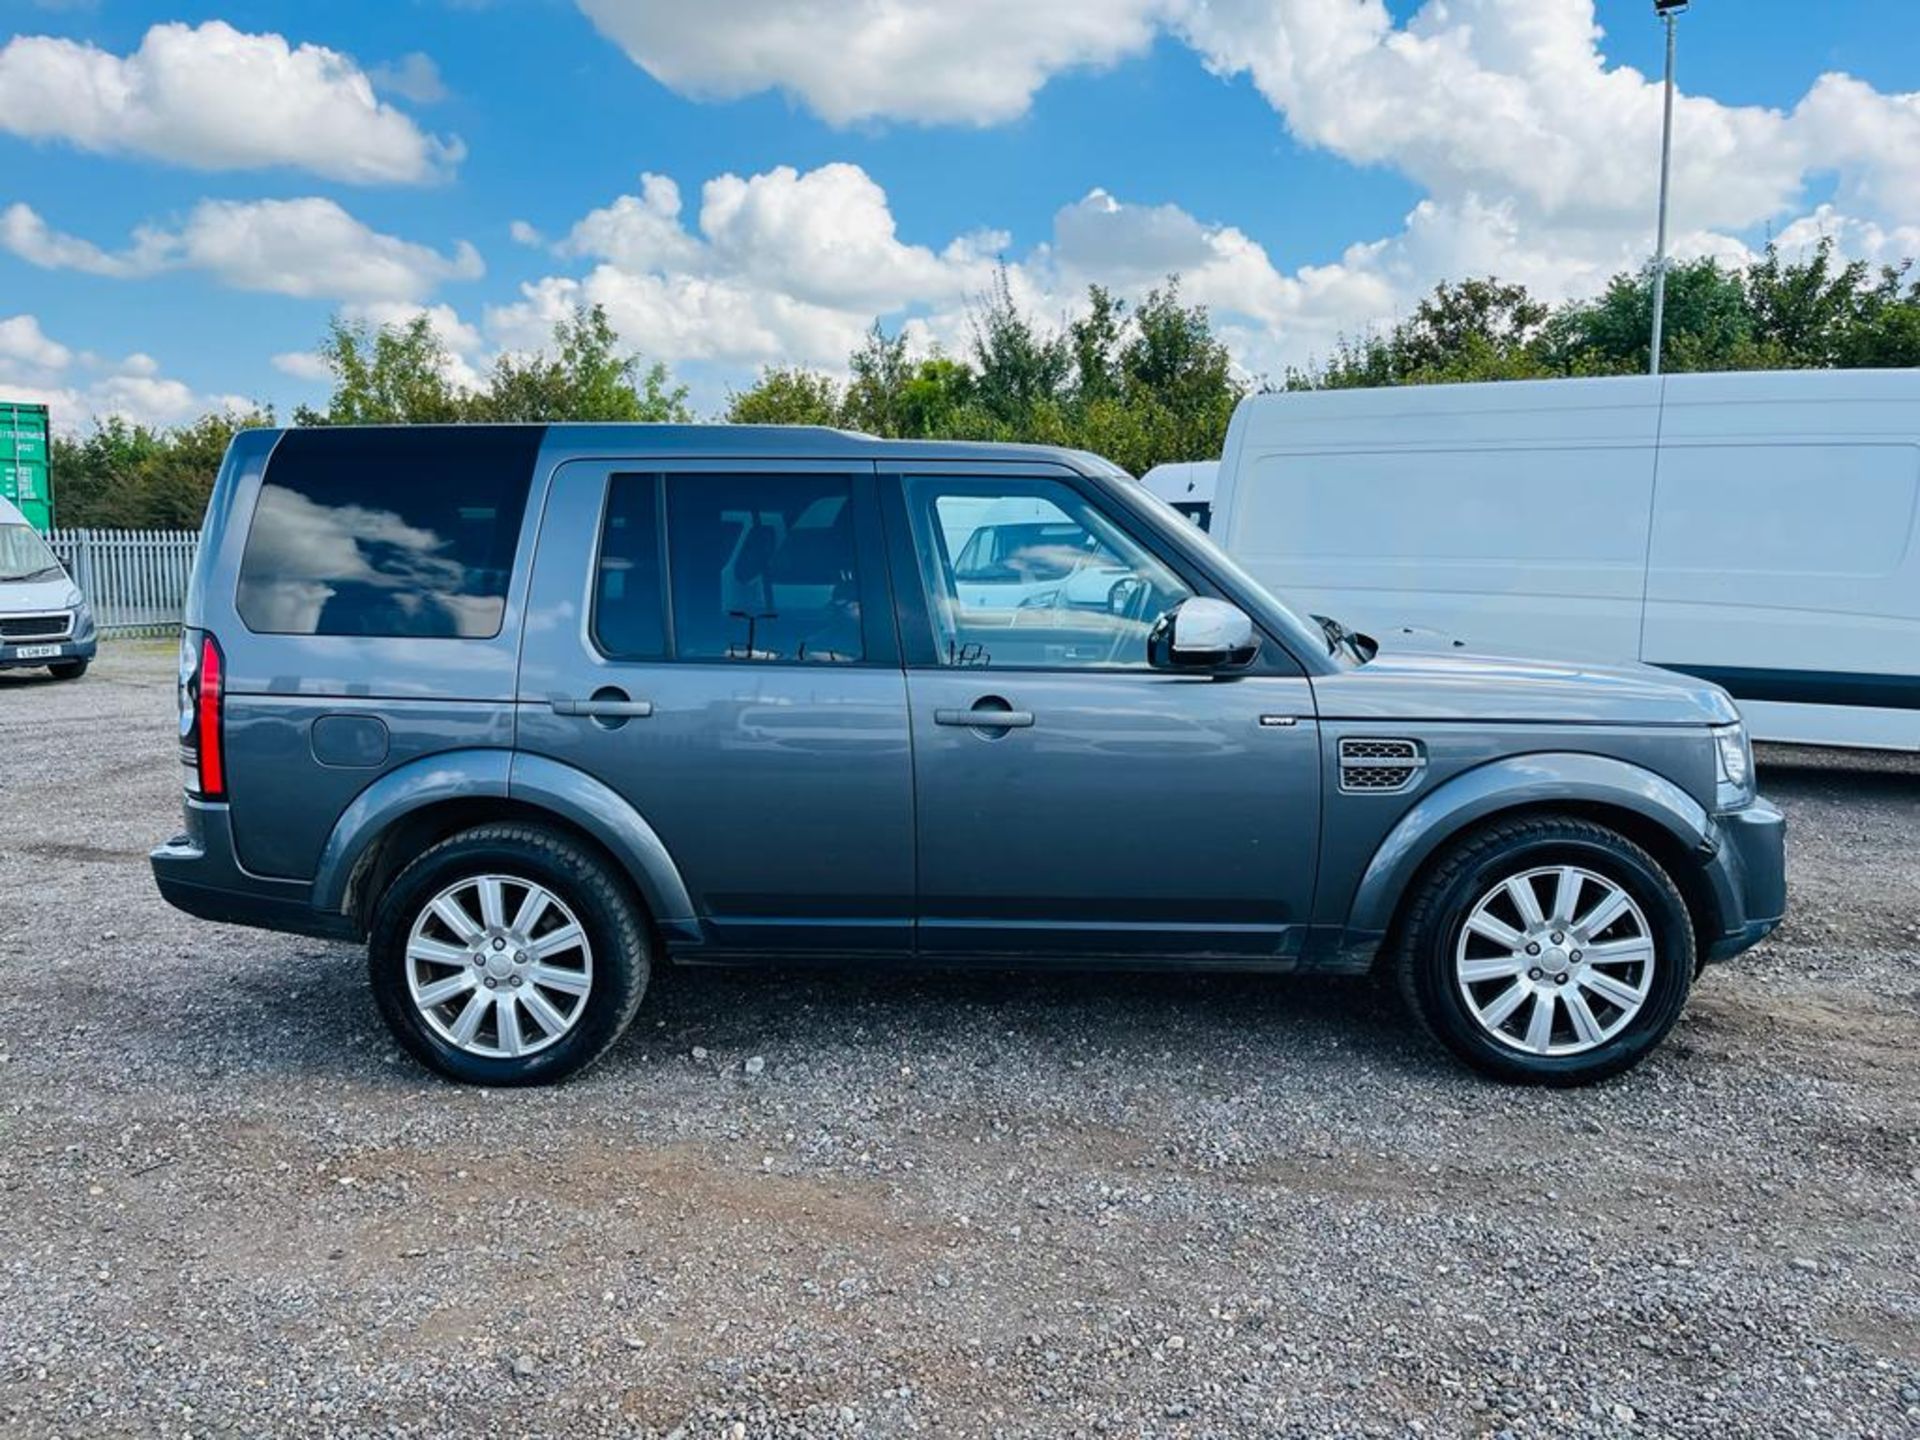 Land Rover Discovery 4 3.0 SDV6 XS CommandShift 2014 '14 Reg' Sat Nav - A/C - 4WD - Image 11 of 26